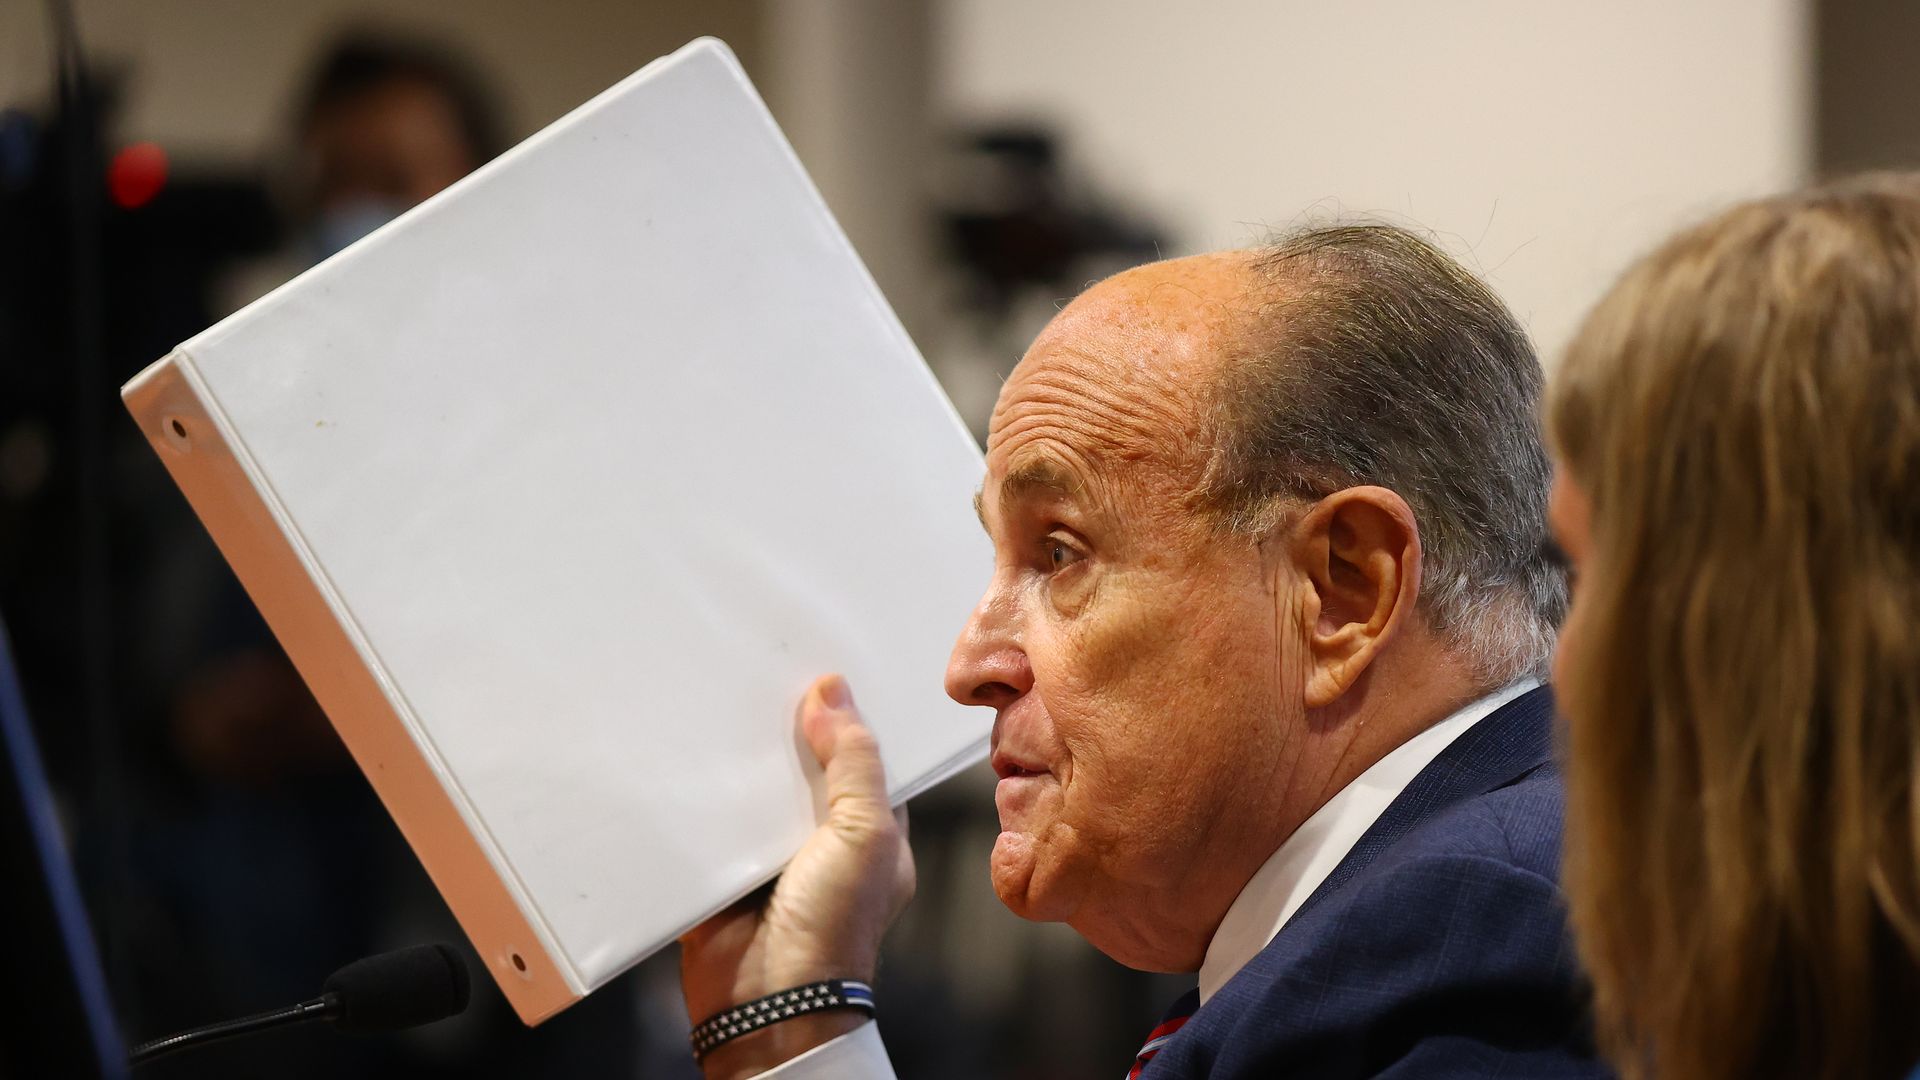 Rudy Giuliani speaks at an election hearing in Lansing, Mich., on Dec. 2.